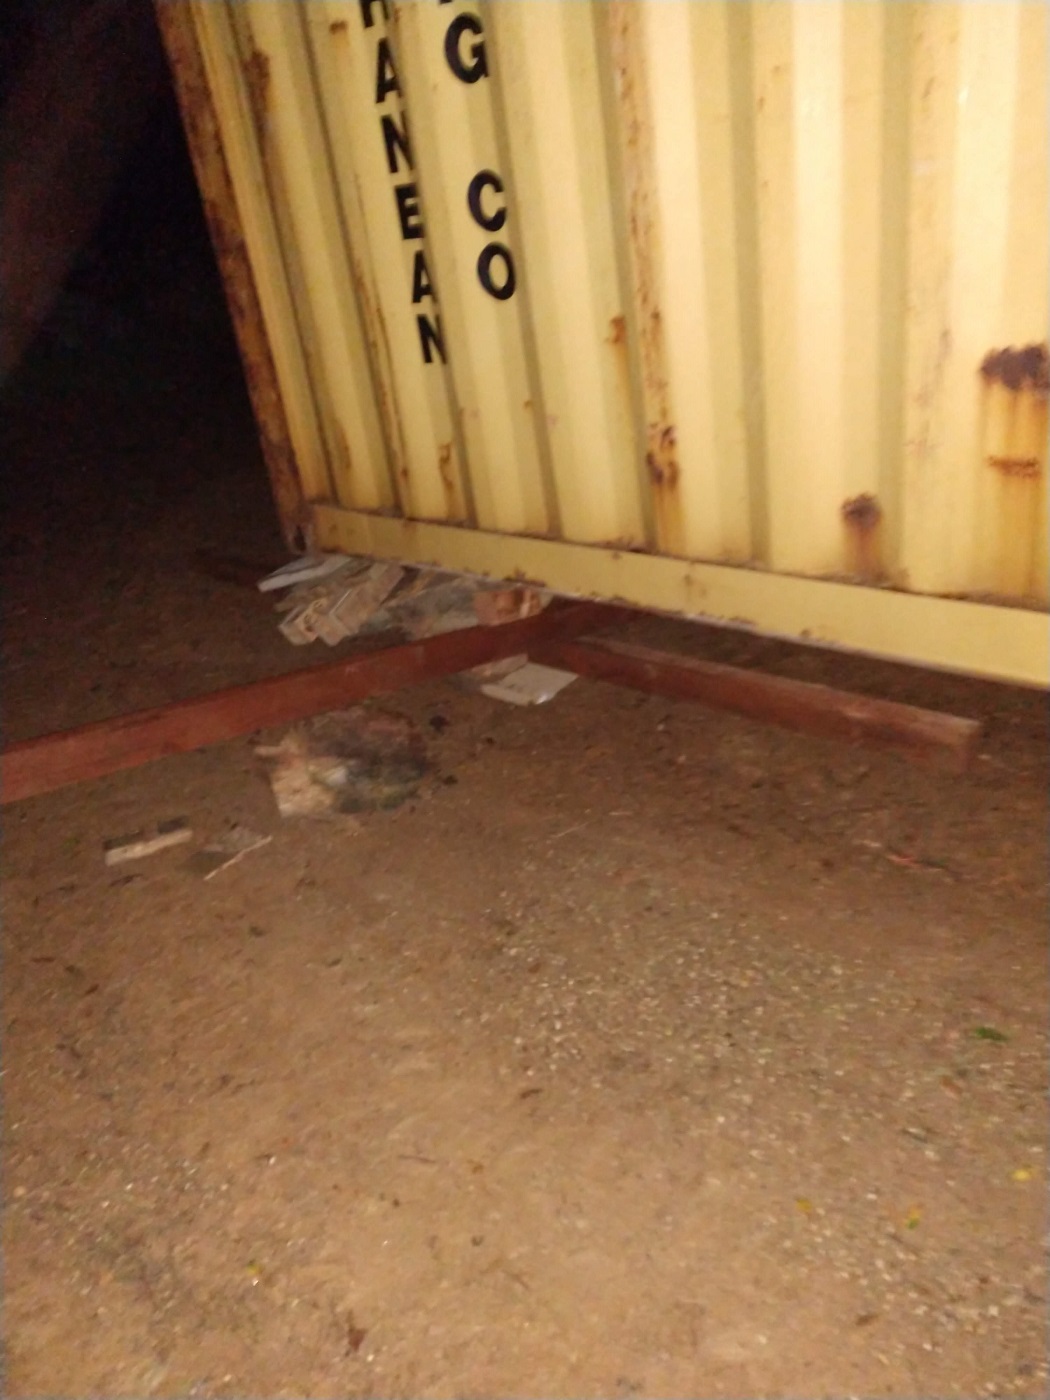 	How the driver left the container